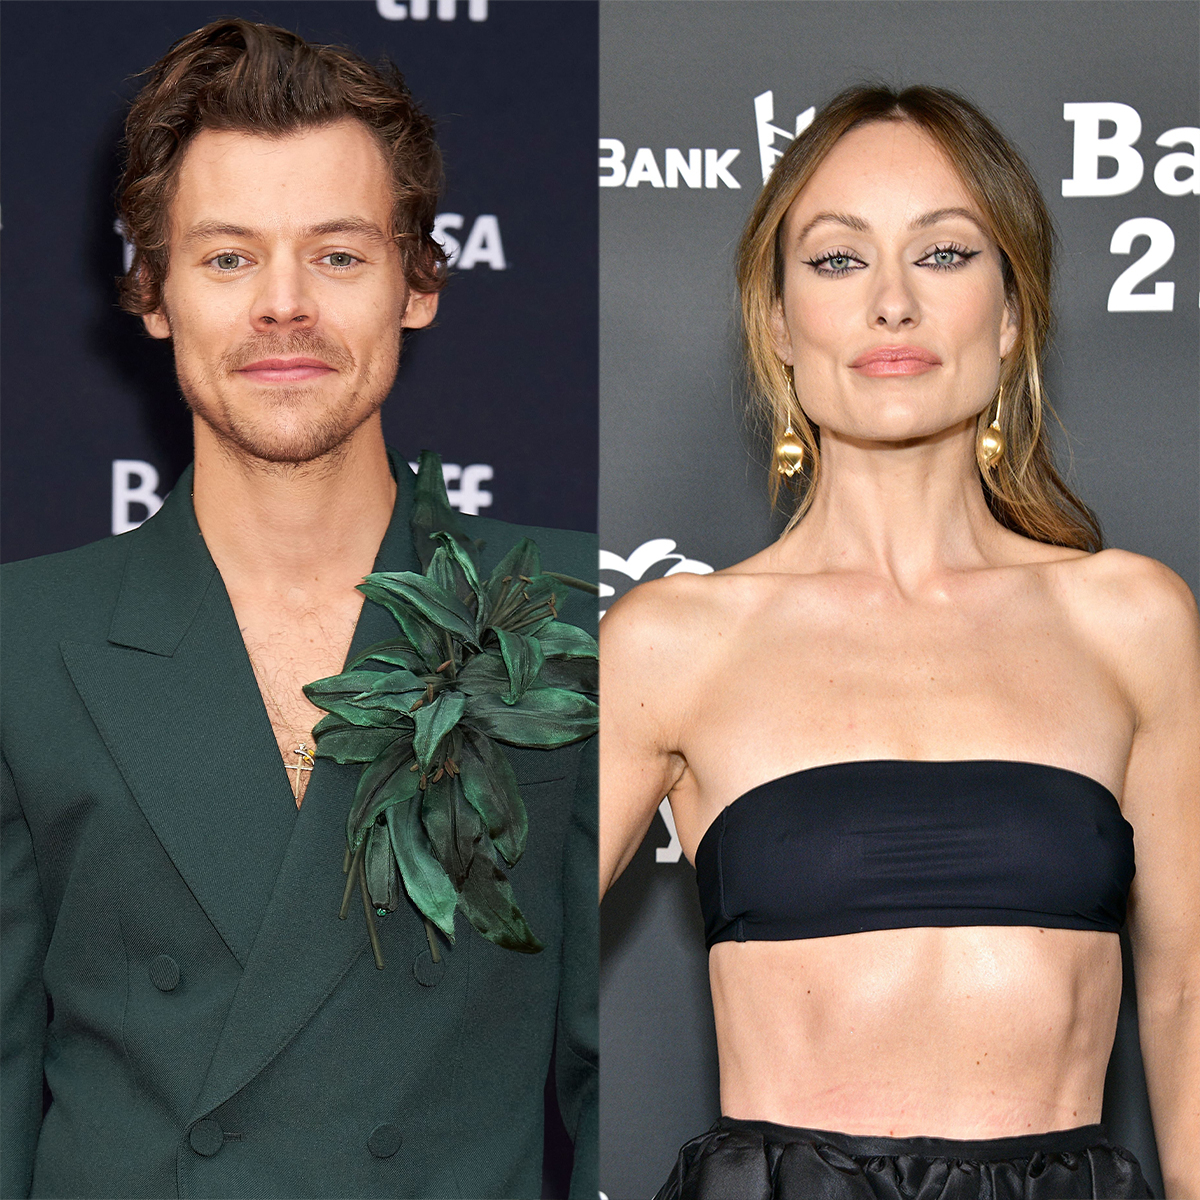 Harry Styles and Olivia Wilde 'split' after nearly two years together, Ents & Arts News